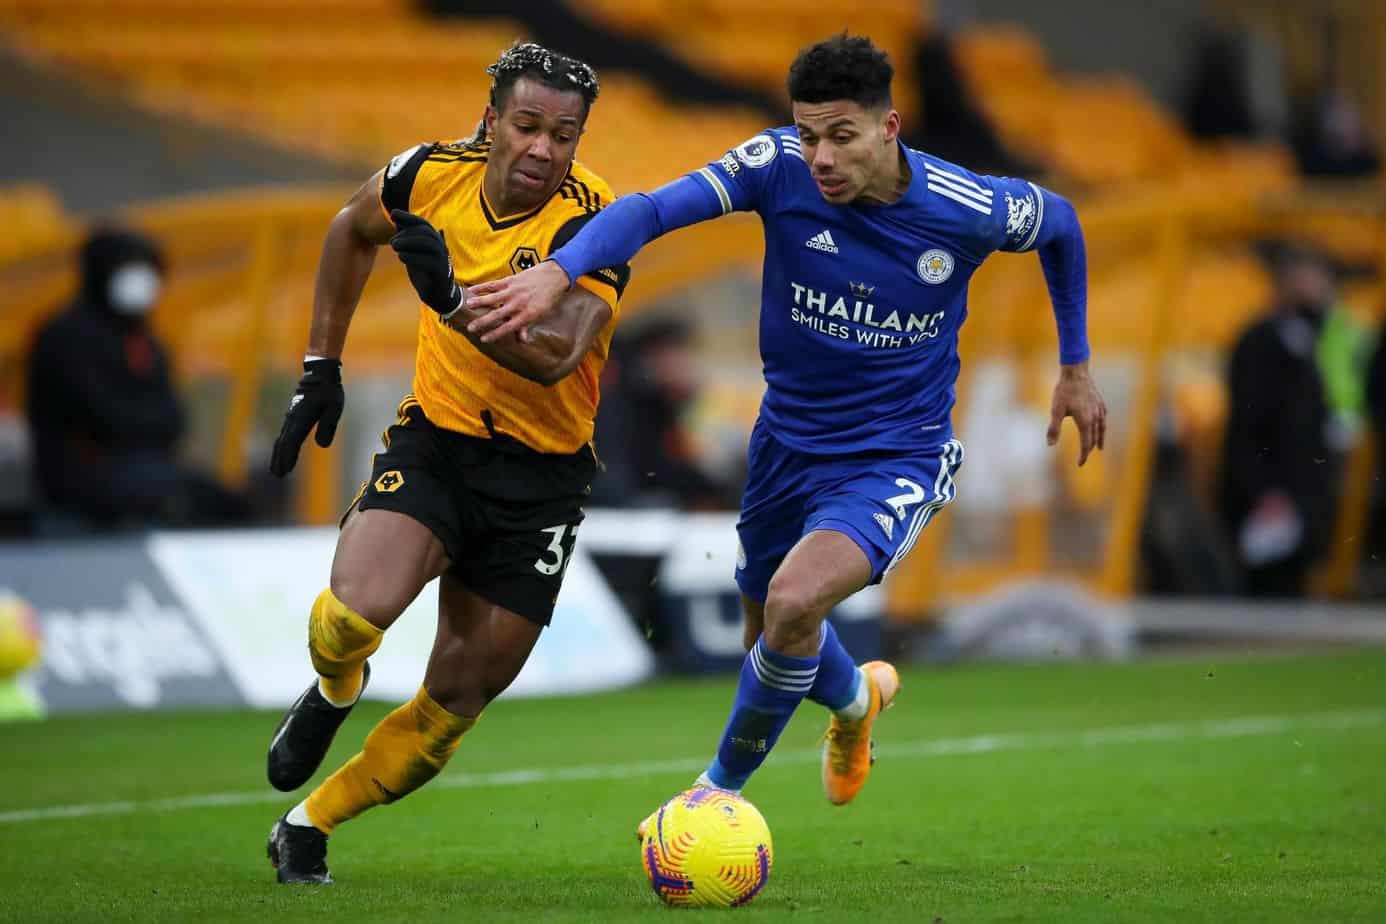 Wolverhampton Wanderers vs. Leicester City – Preview and Betting Odds